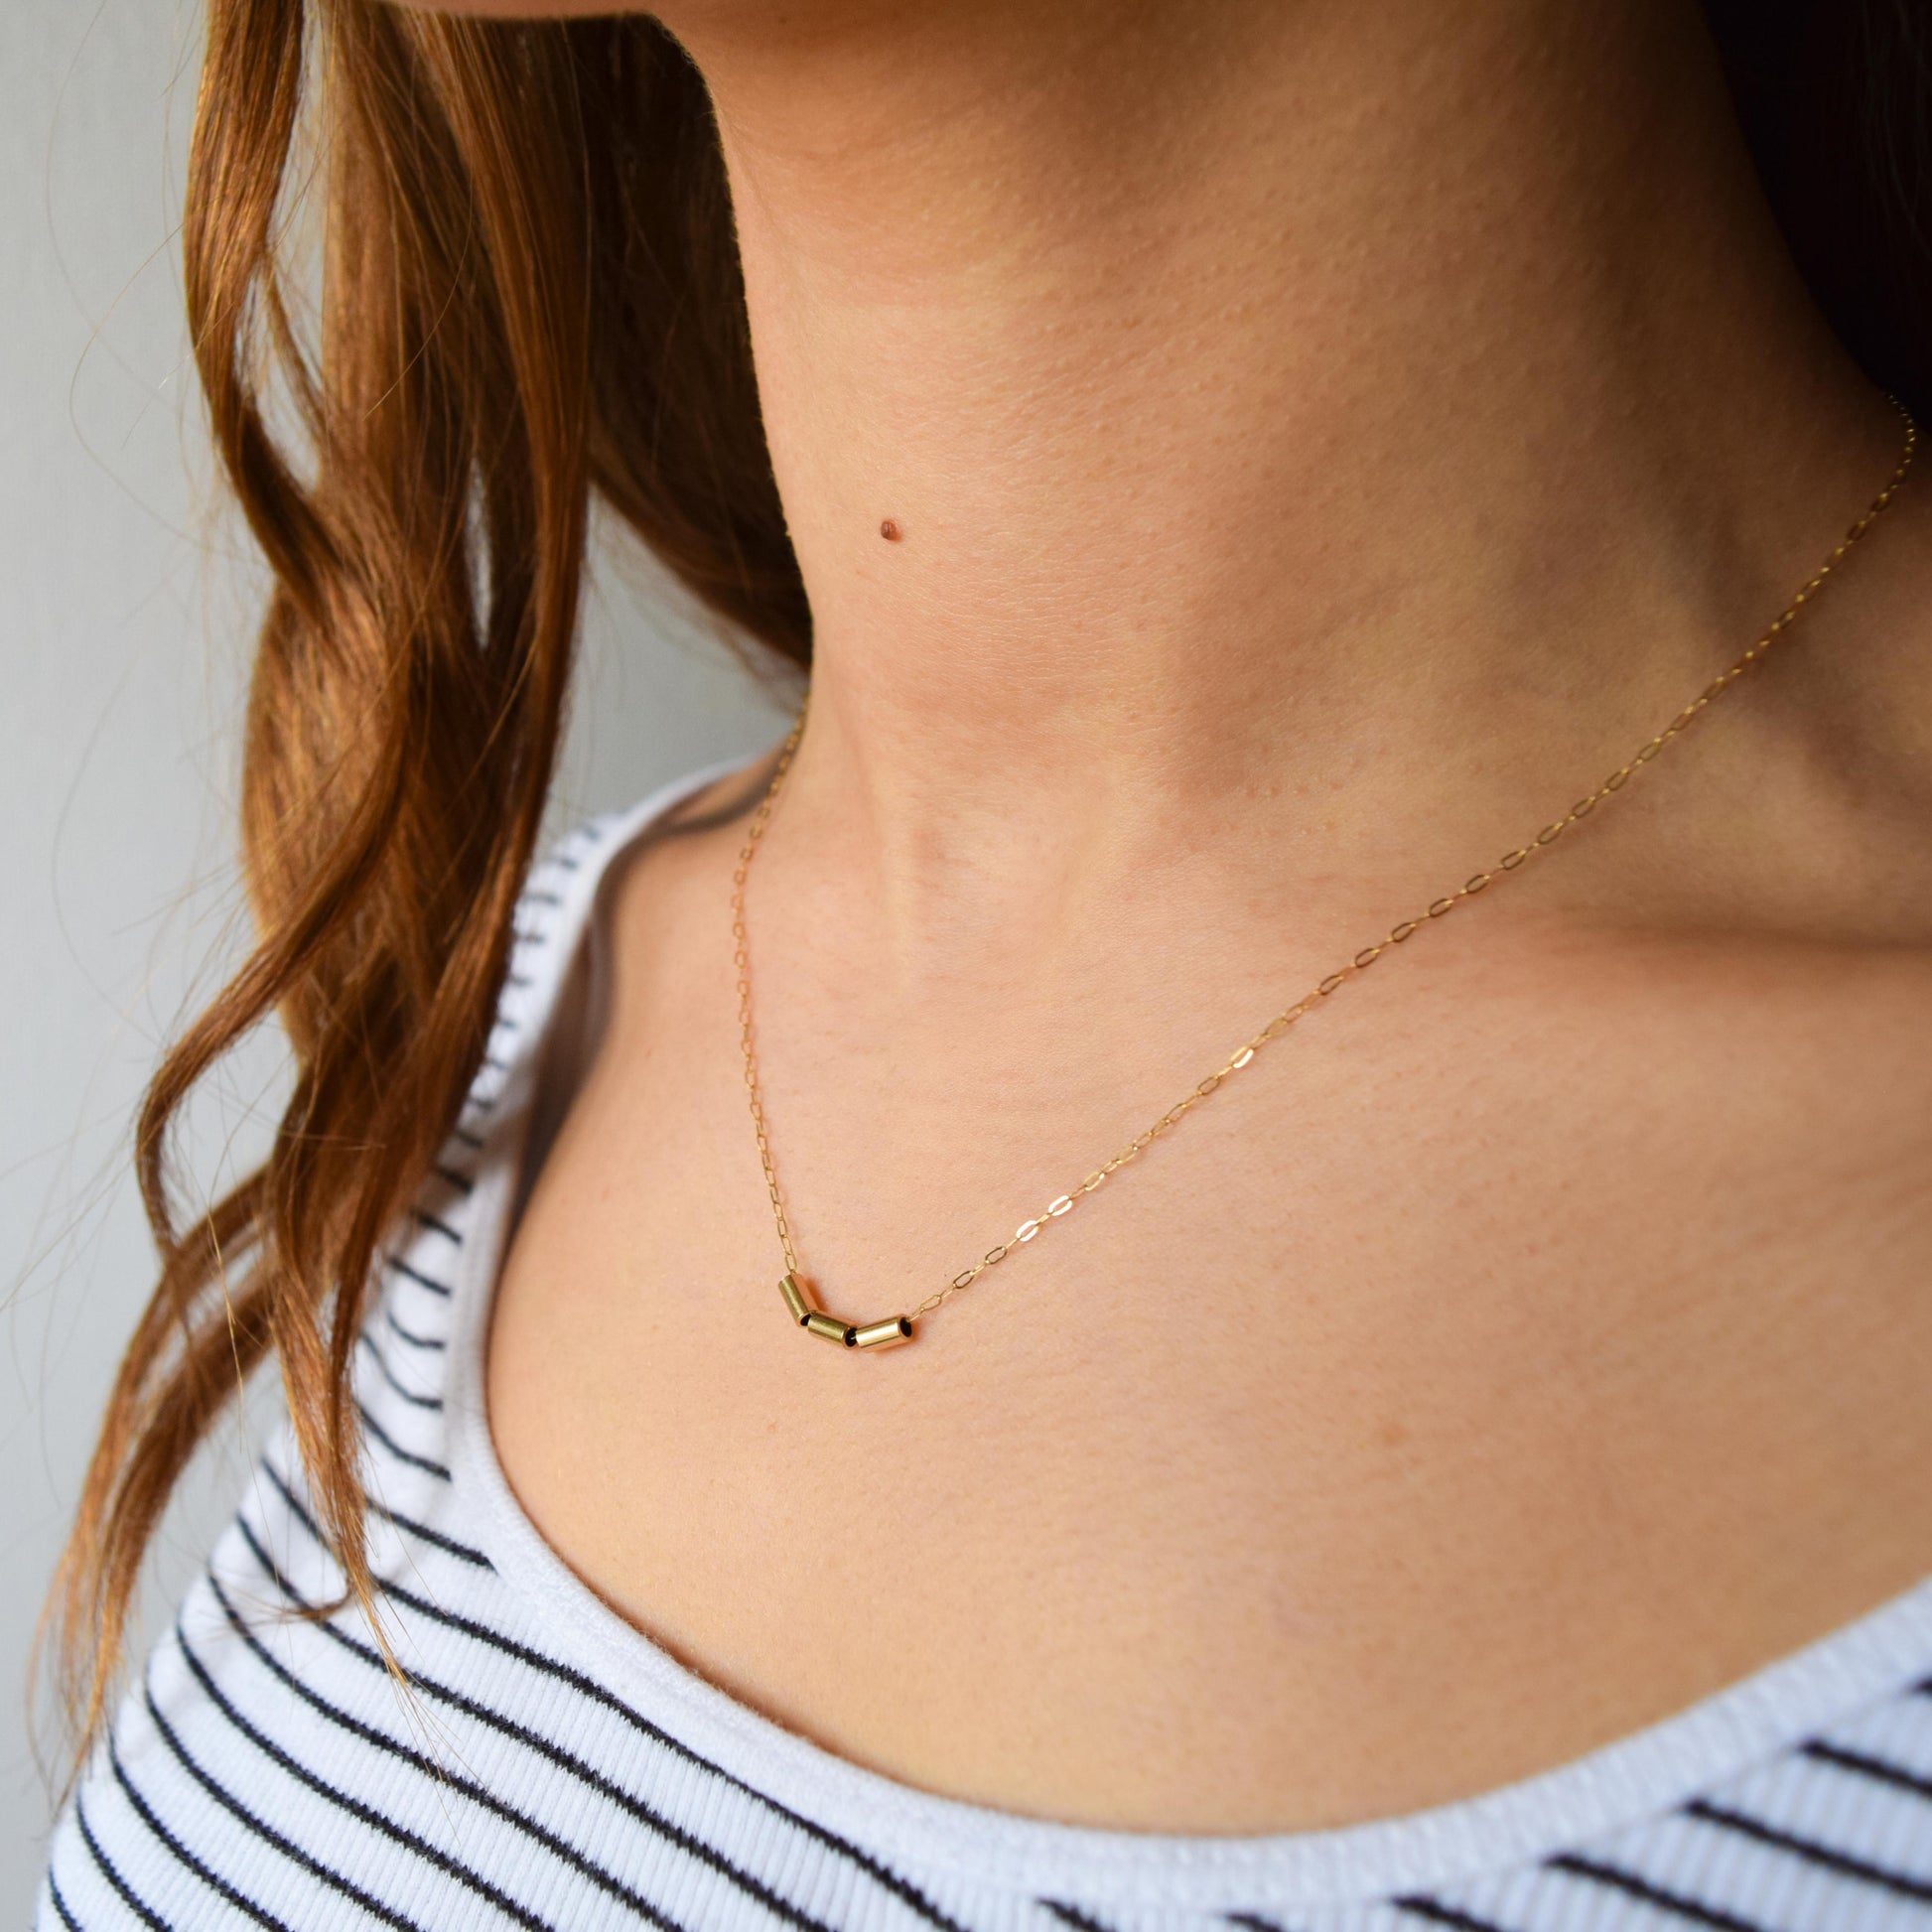 9ct gold nugget necklace on model with brown hair